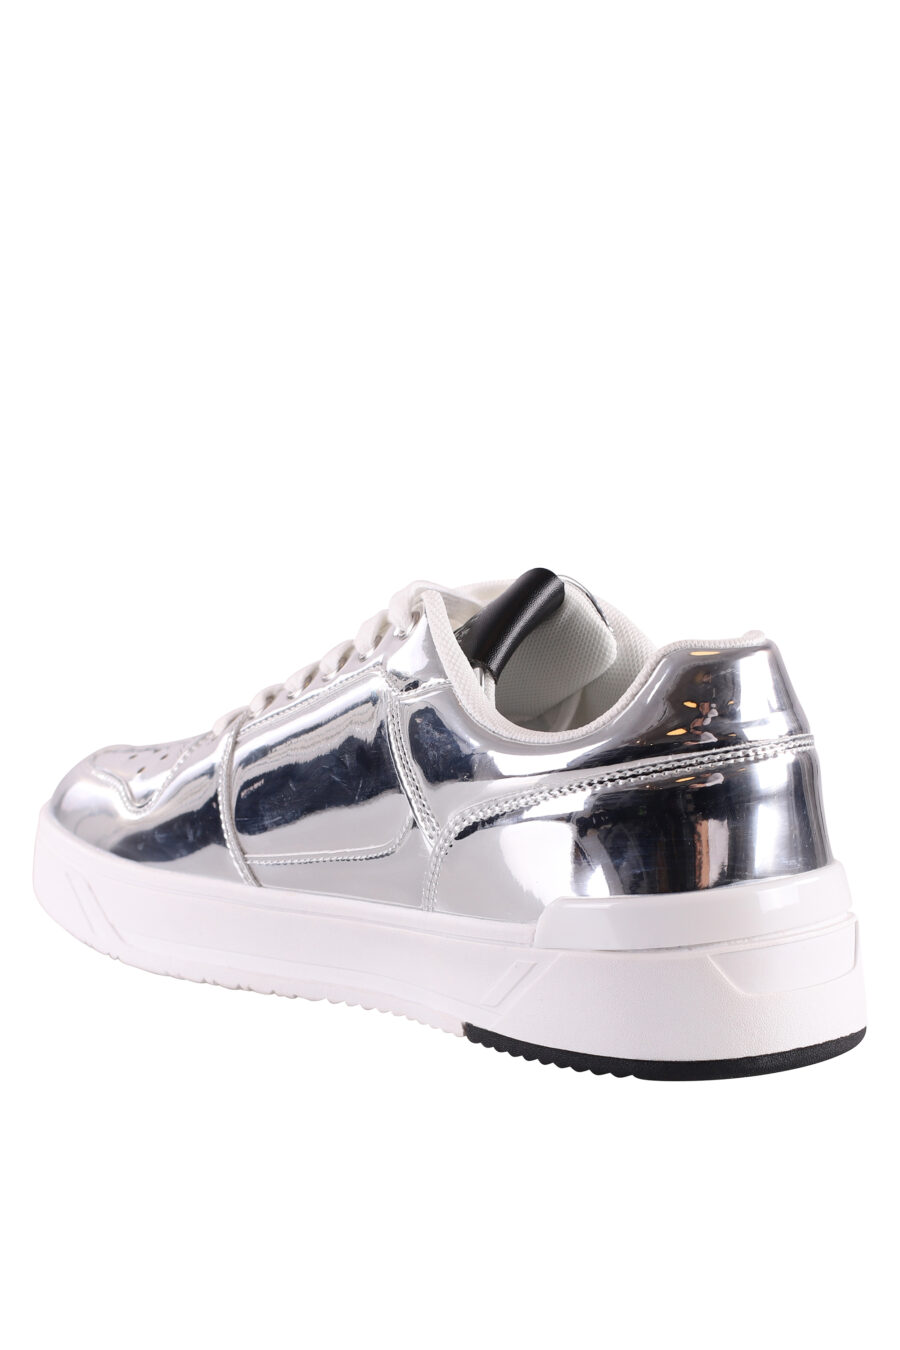 Silver mirror effect shoes with maxilogo - IMG 8475